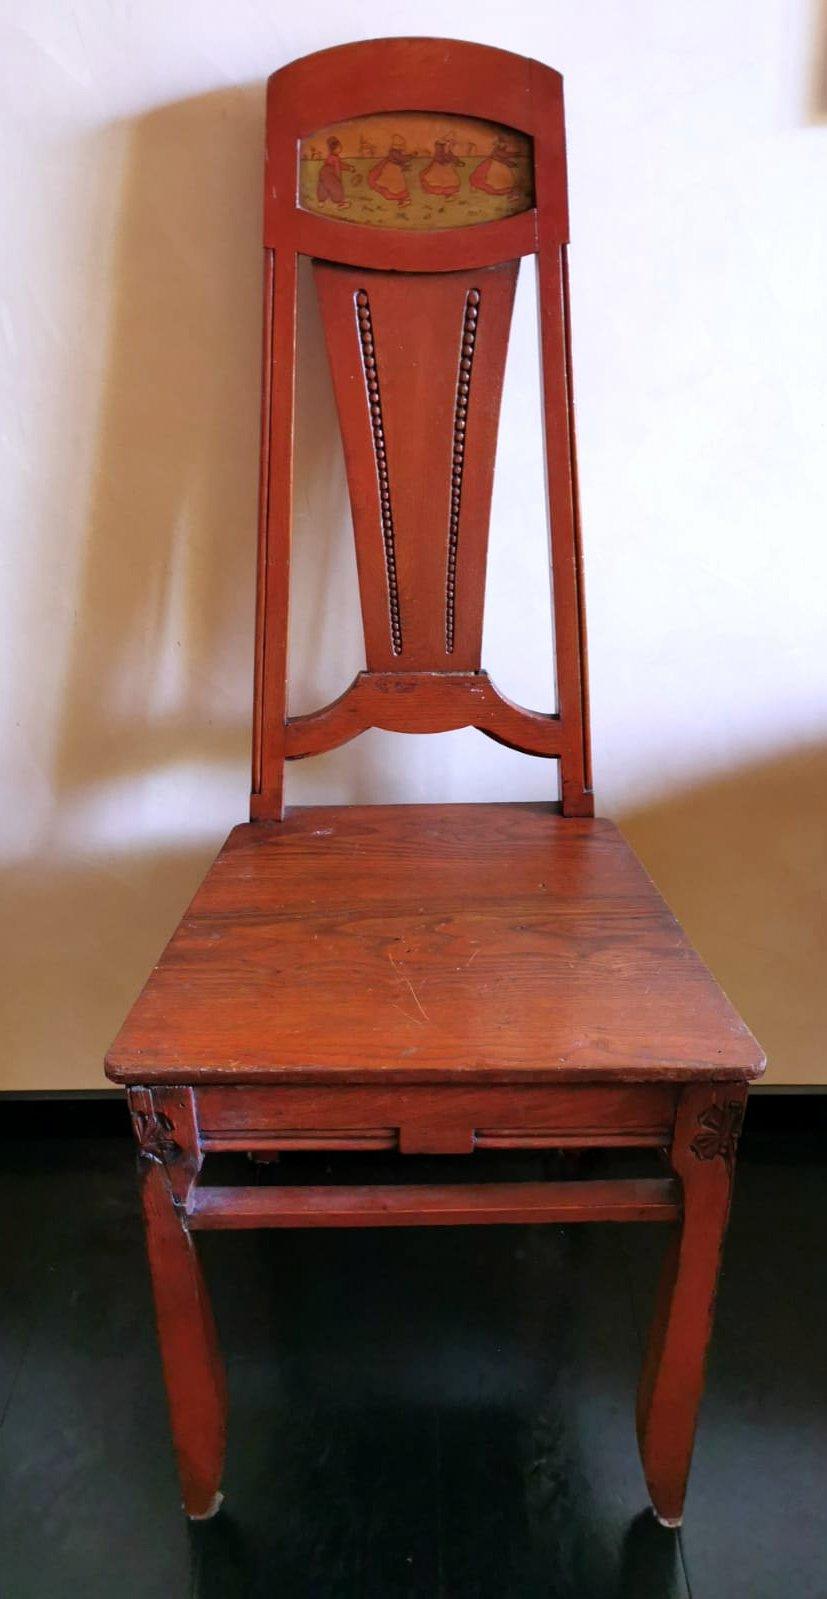 We kindly suggest you read the whole description, because with it we try to give you detailed technical and historical information to guarantee the authenticity of our objects.
Unique and very particular Austrian chair made of oak wood; the